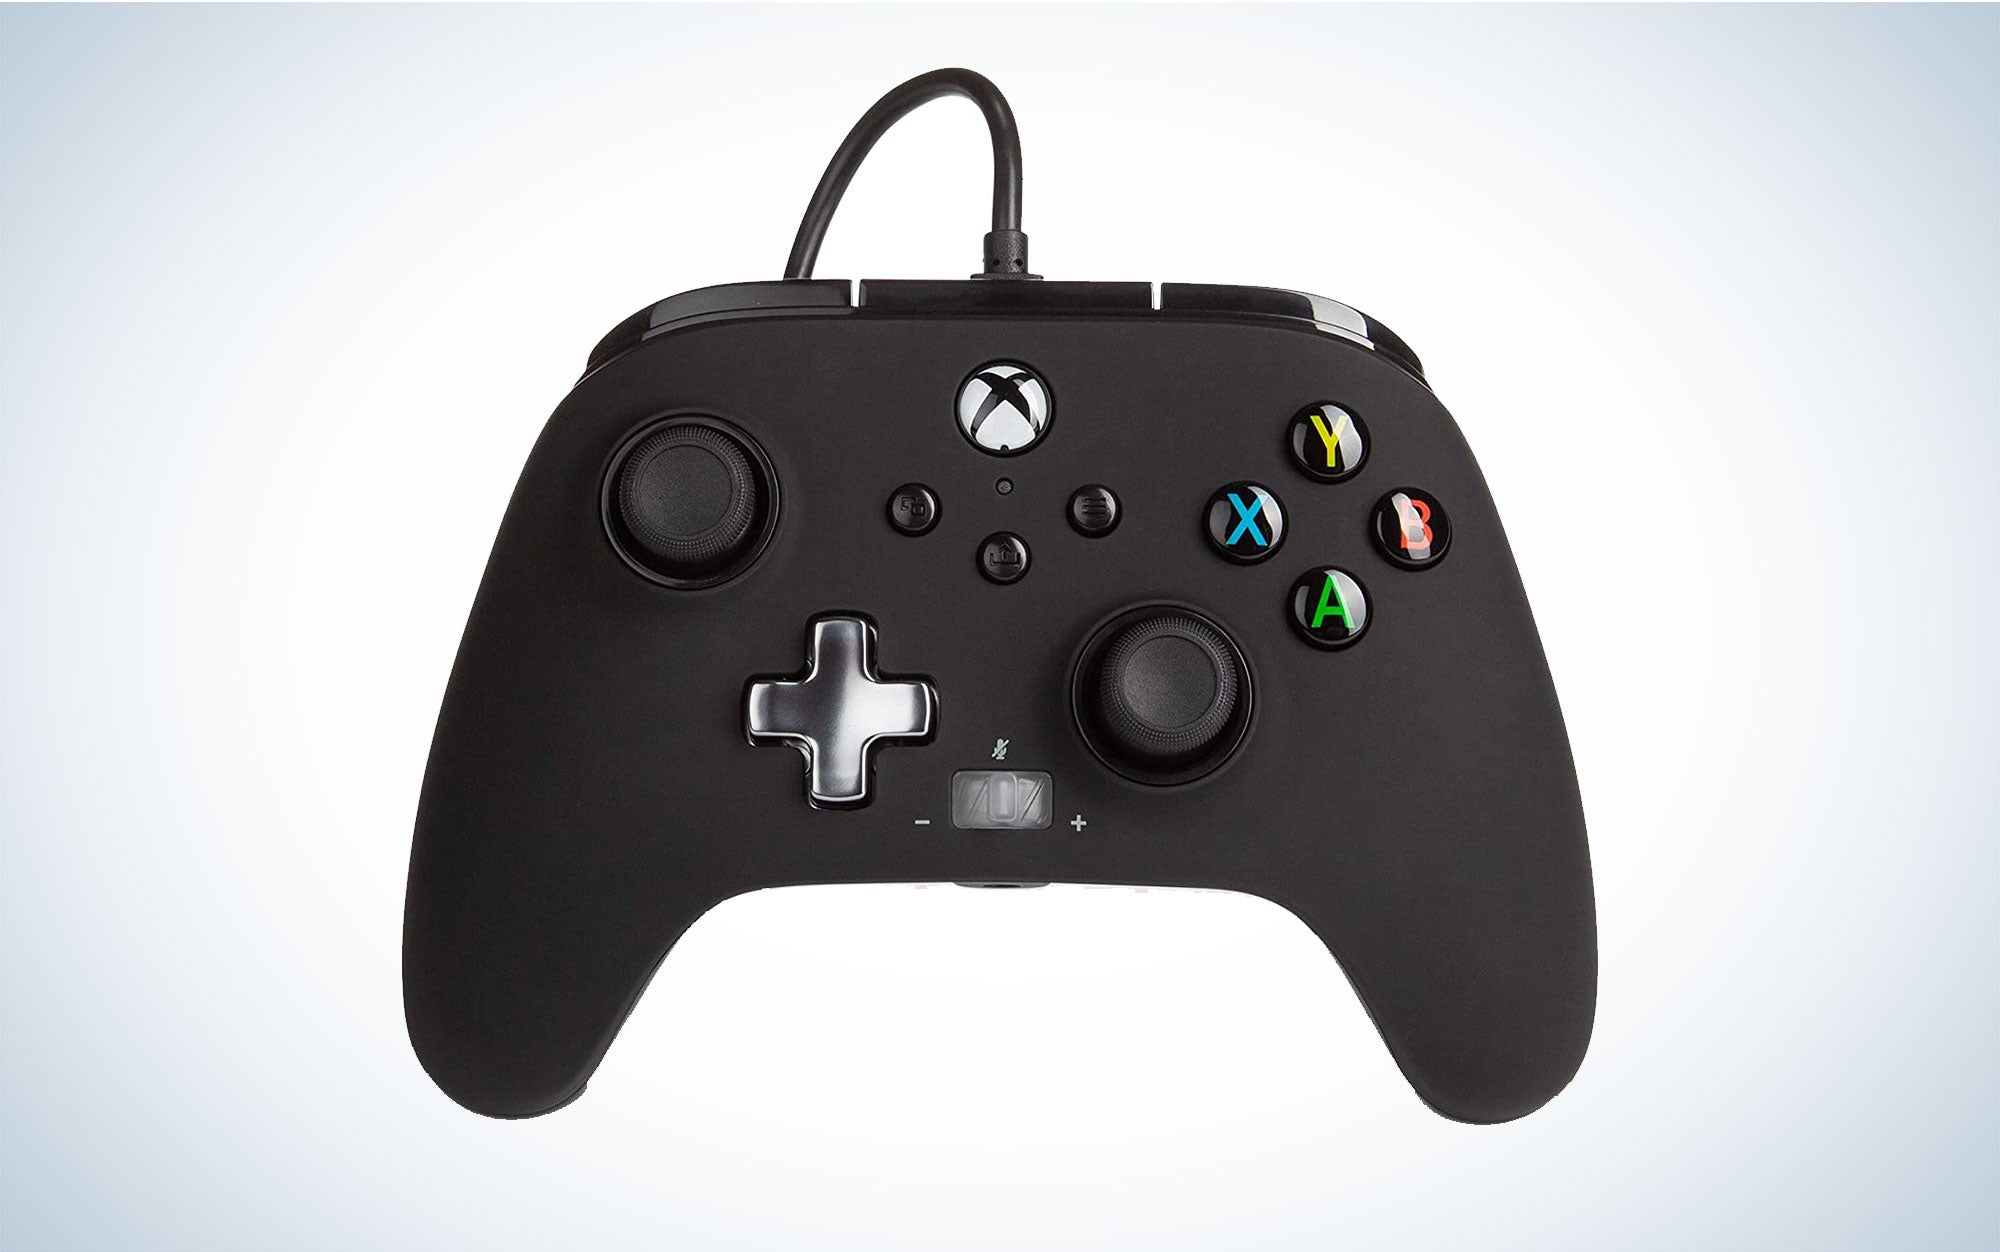 The PowerA Enhanced controller is the best Xbox One Controller.